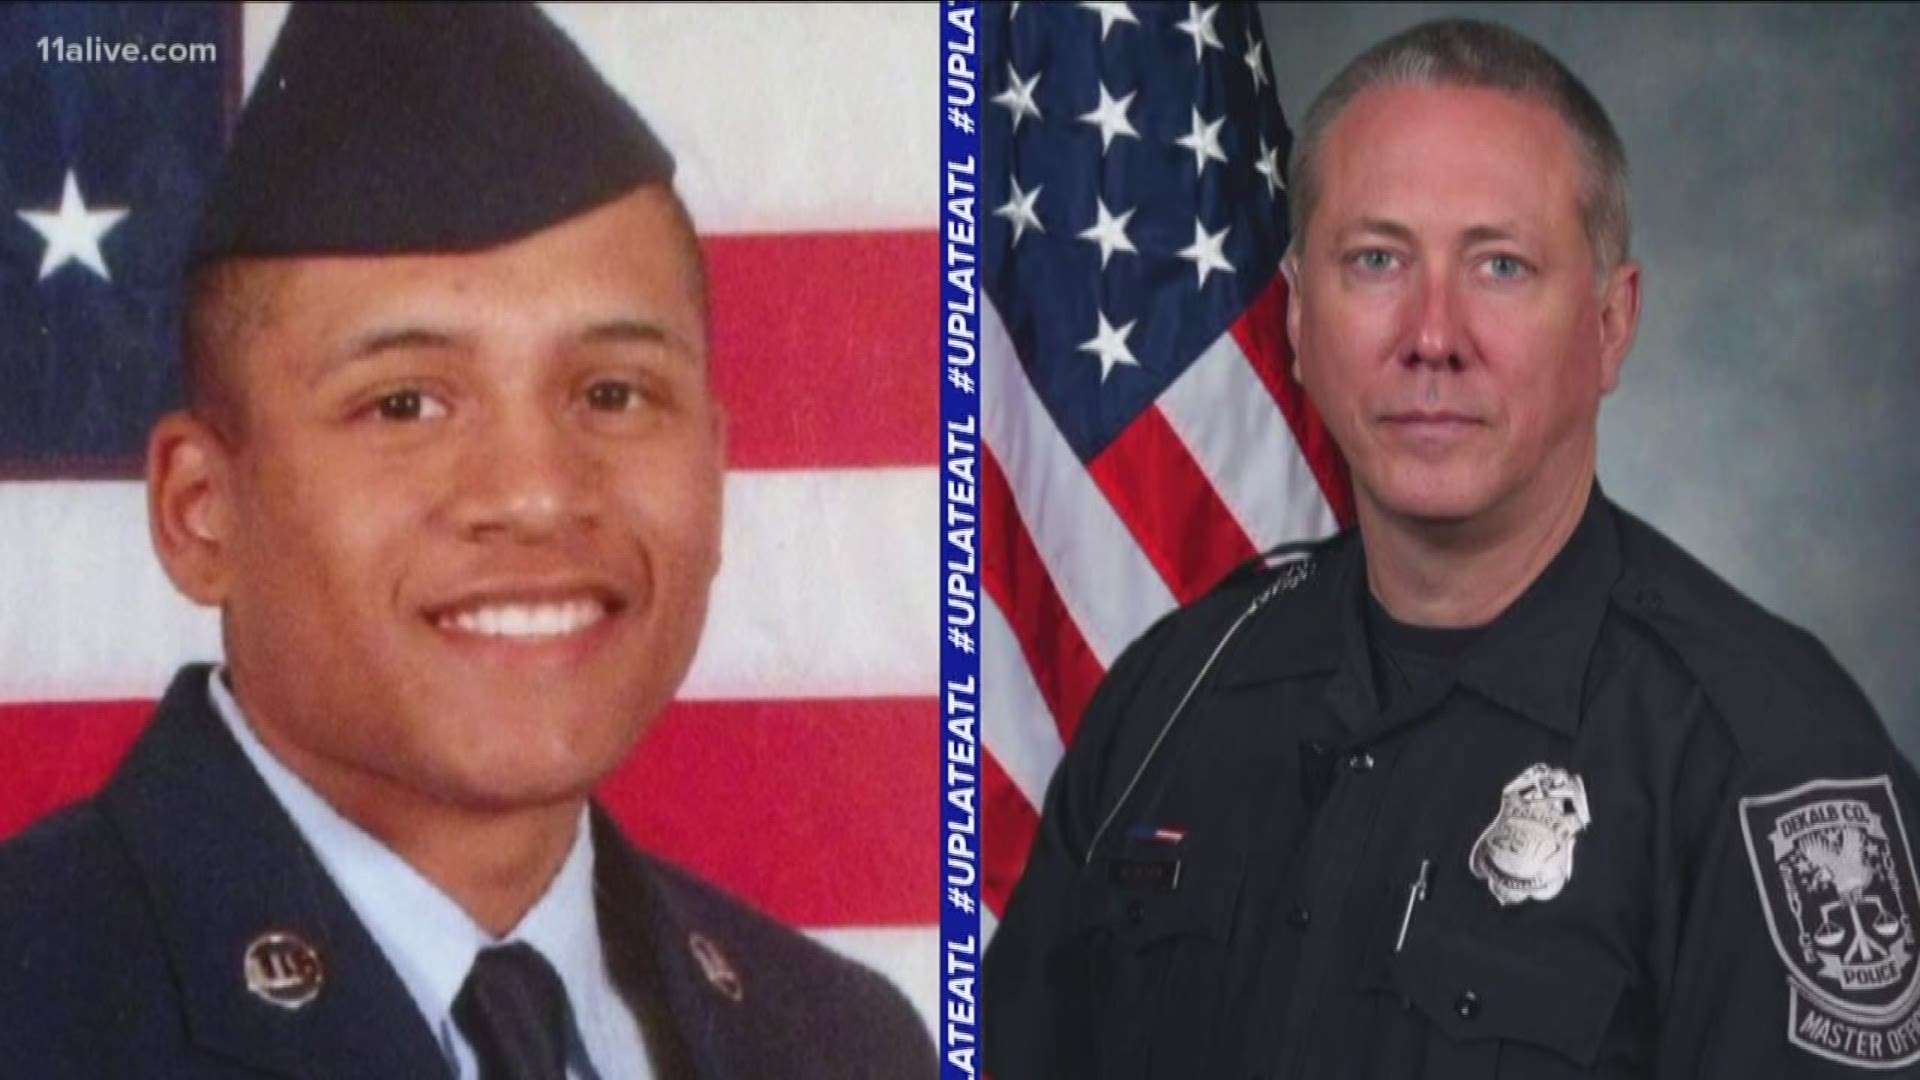 Family of the Air Force vet claim he had PTSD and shouldn't have been killed by former DeKalb officer Robert Olsen.